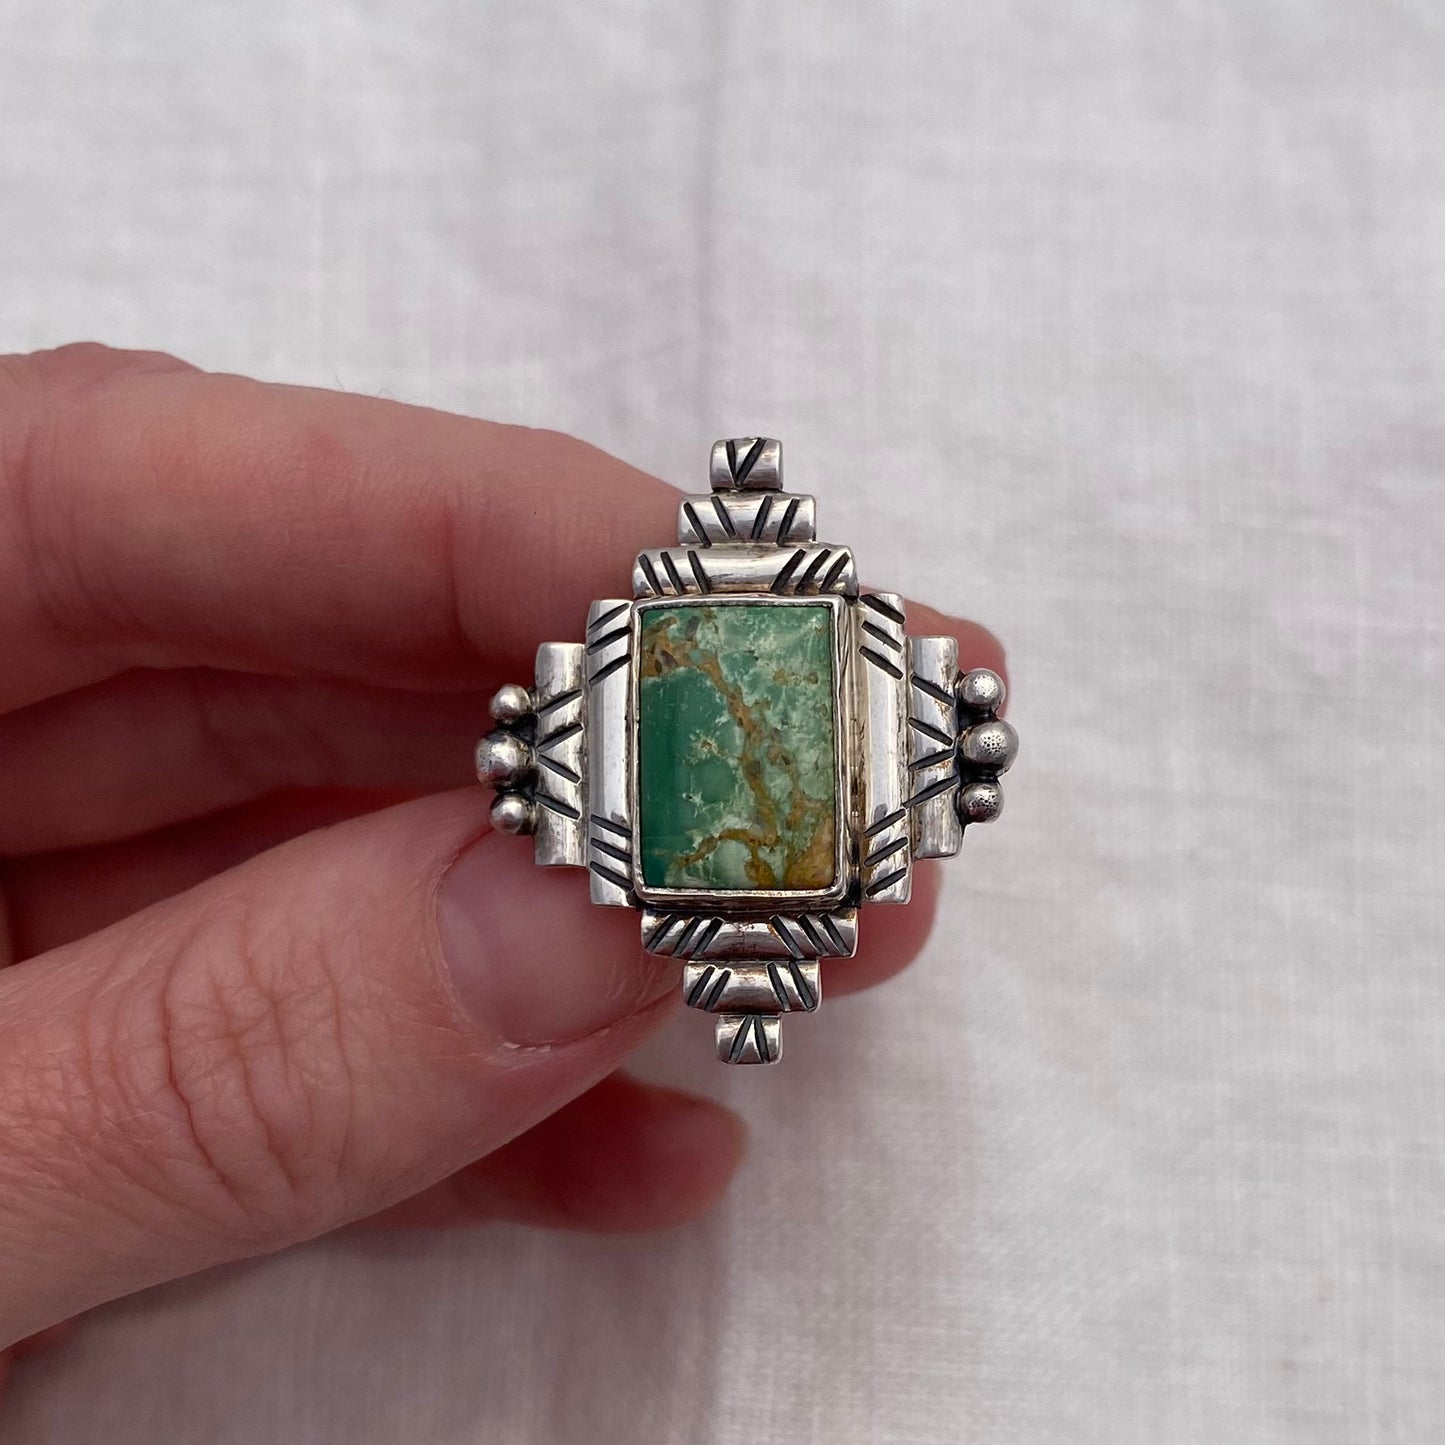 Turquoise Ring - Size 6.5